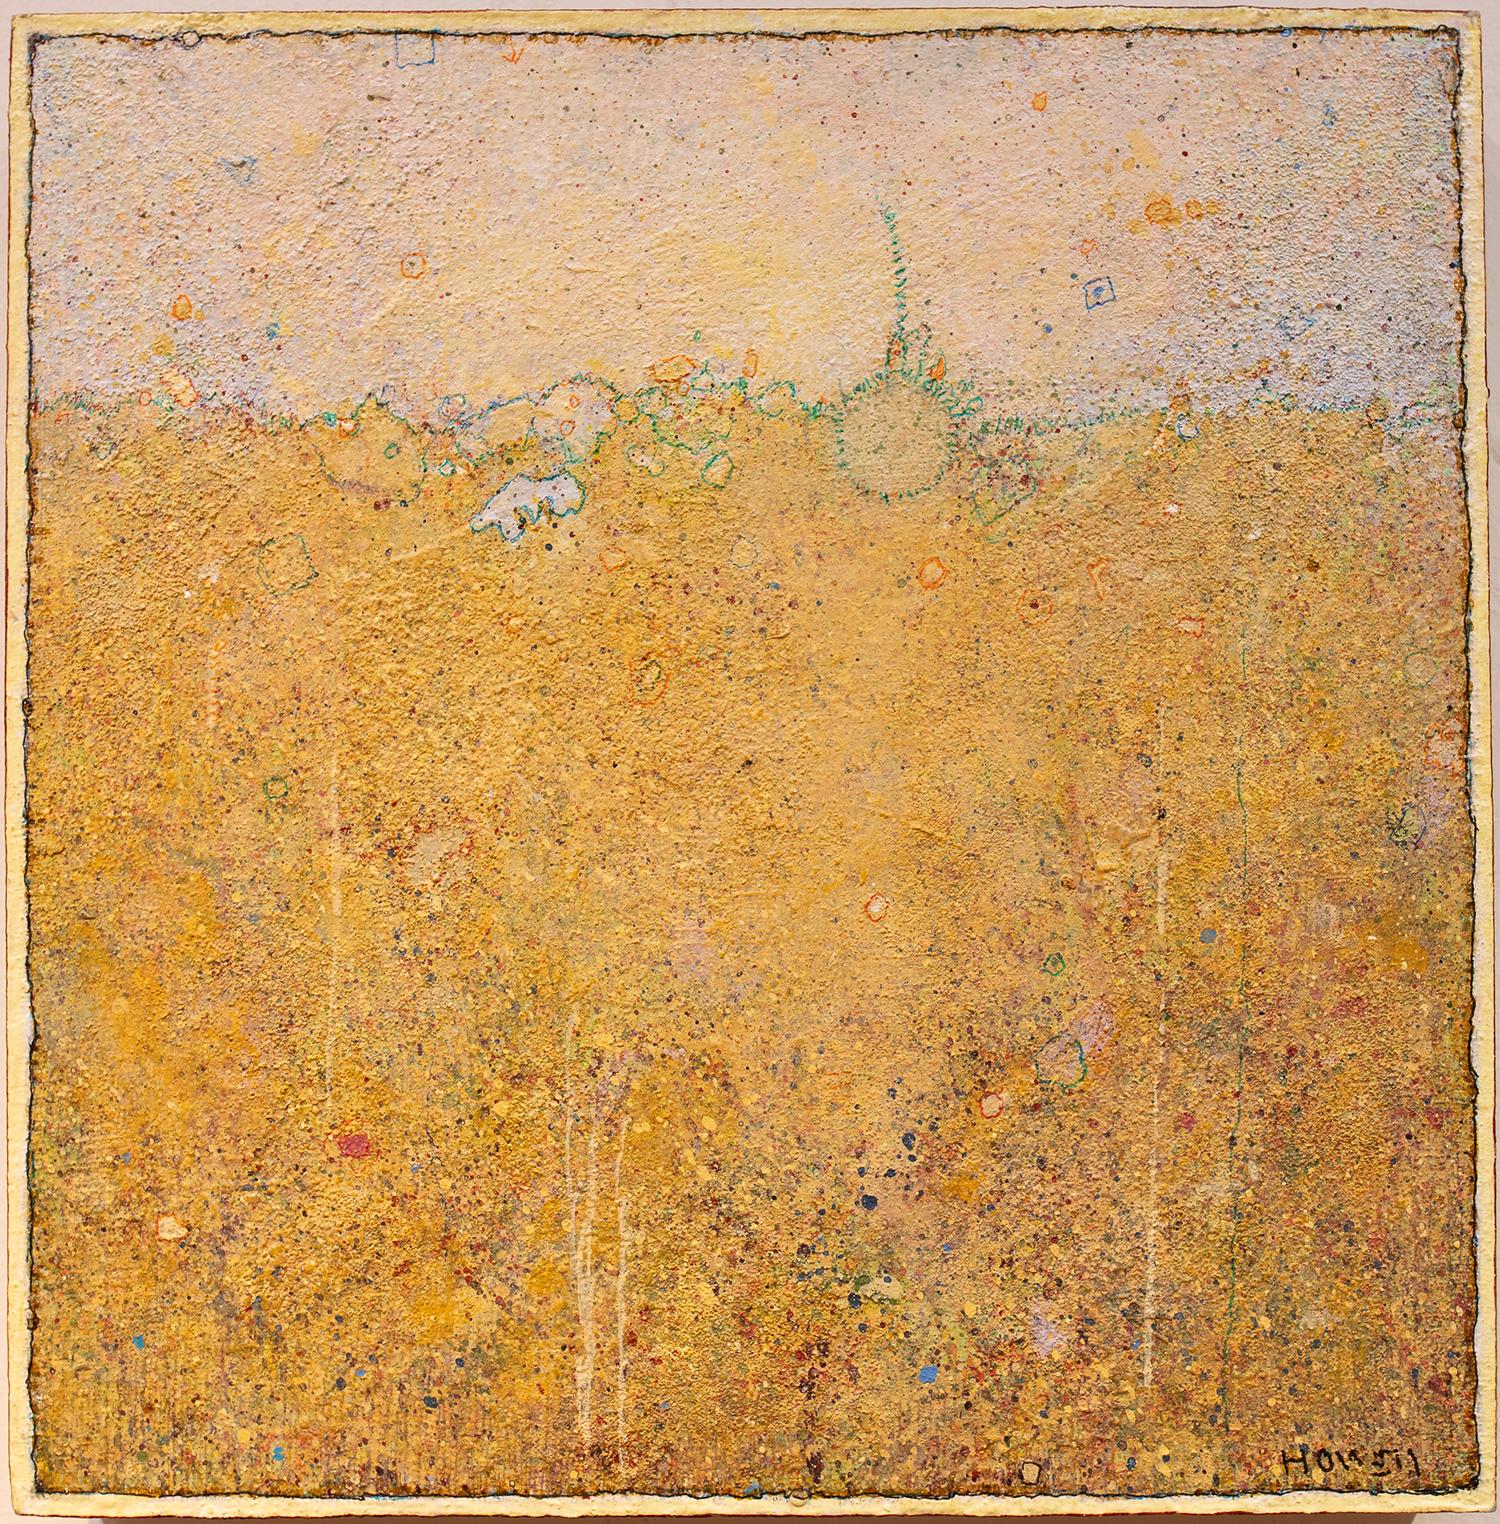 Elwood Howell Landscape Painting - 'Sprout' transitional acrylic soft yellow earth landscape, small painting